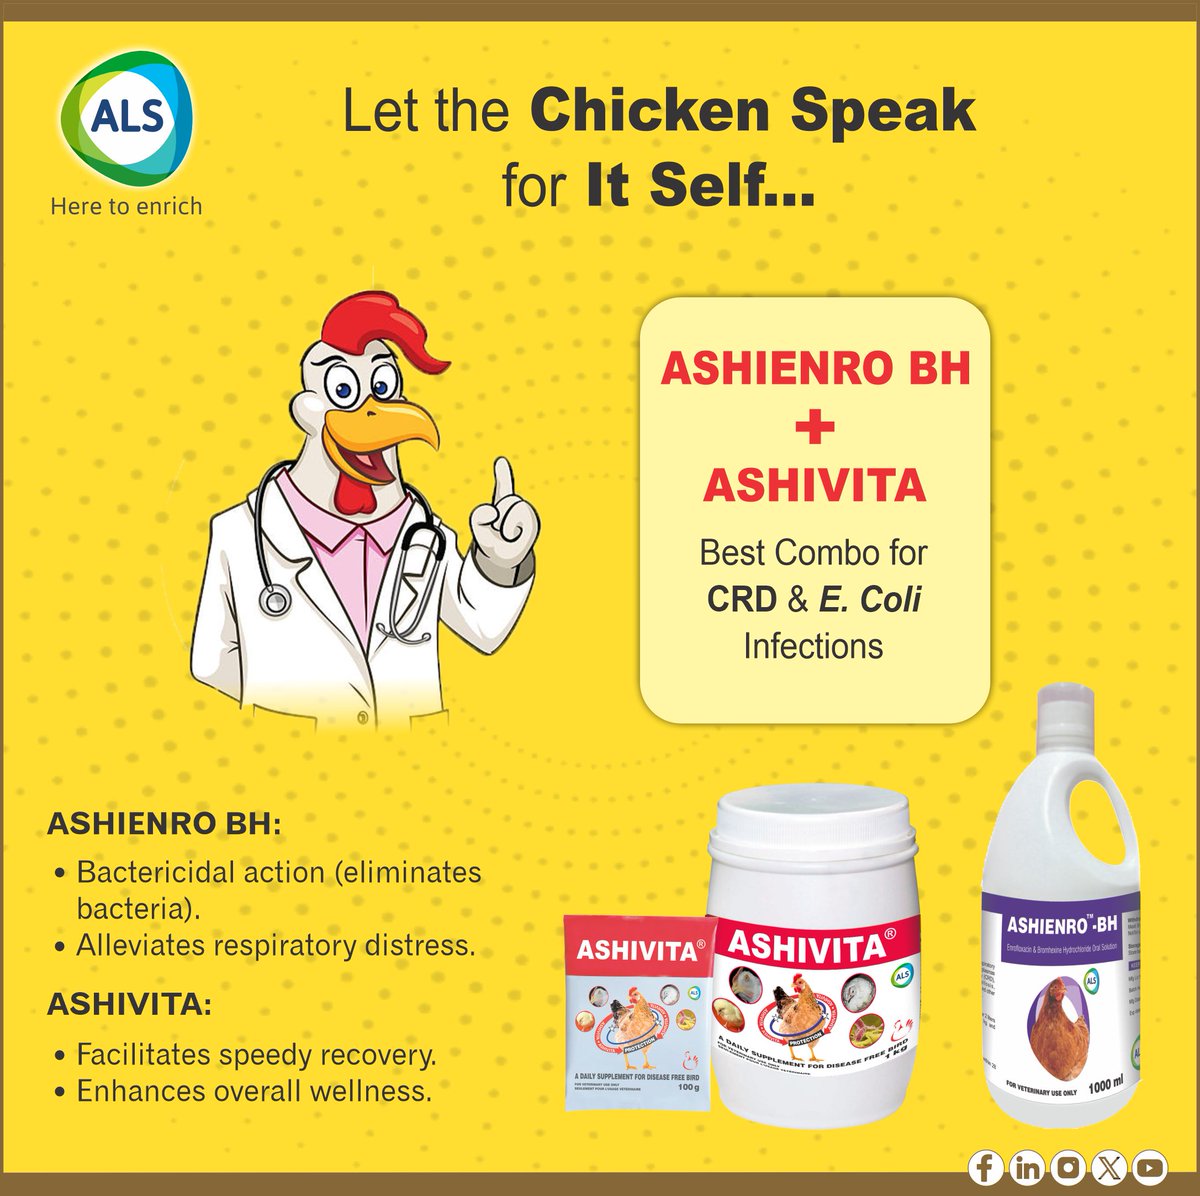 ASHIENRO BH and ASHIVITA form the ultimate duo against CRD & E Coli Infections. ASHIENRO BH provides bactericidal action to eliminate bacteria and alleviate respiratory distress, while ASHIVITA facilitates speedy recovery and enhances overall wellness. #ashienrobh #ashivita